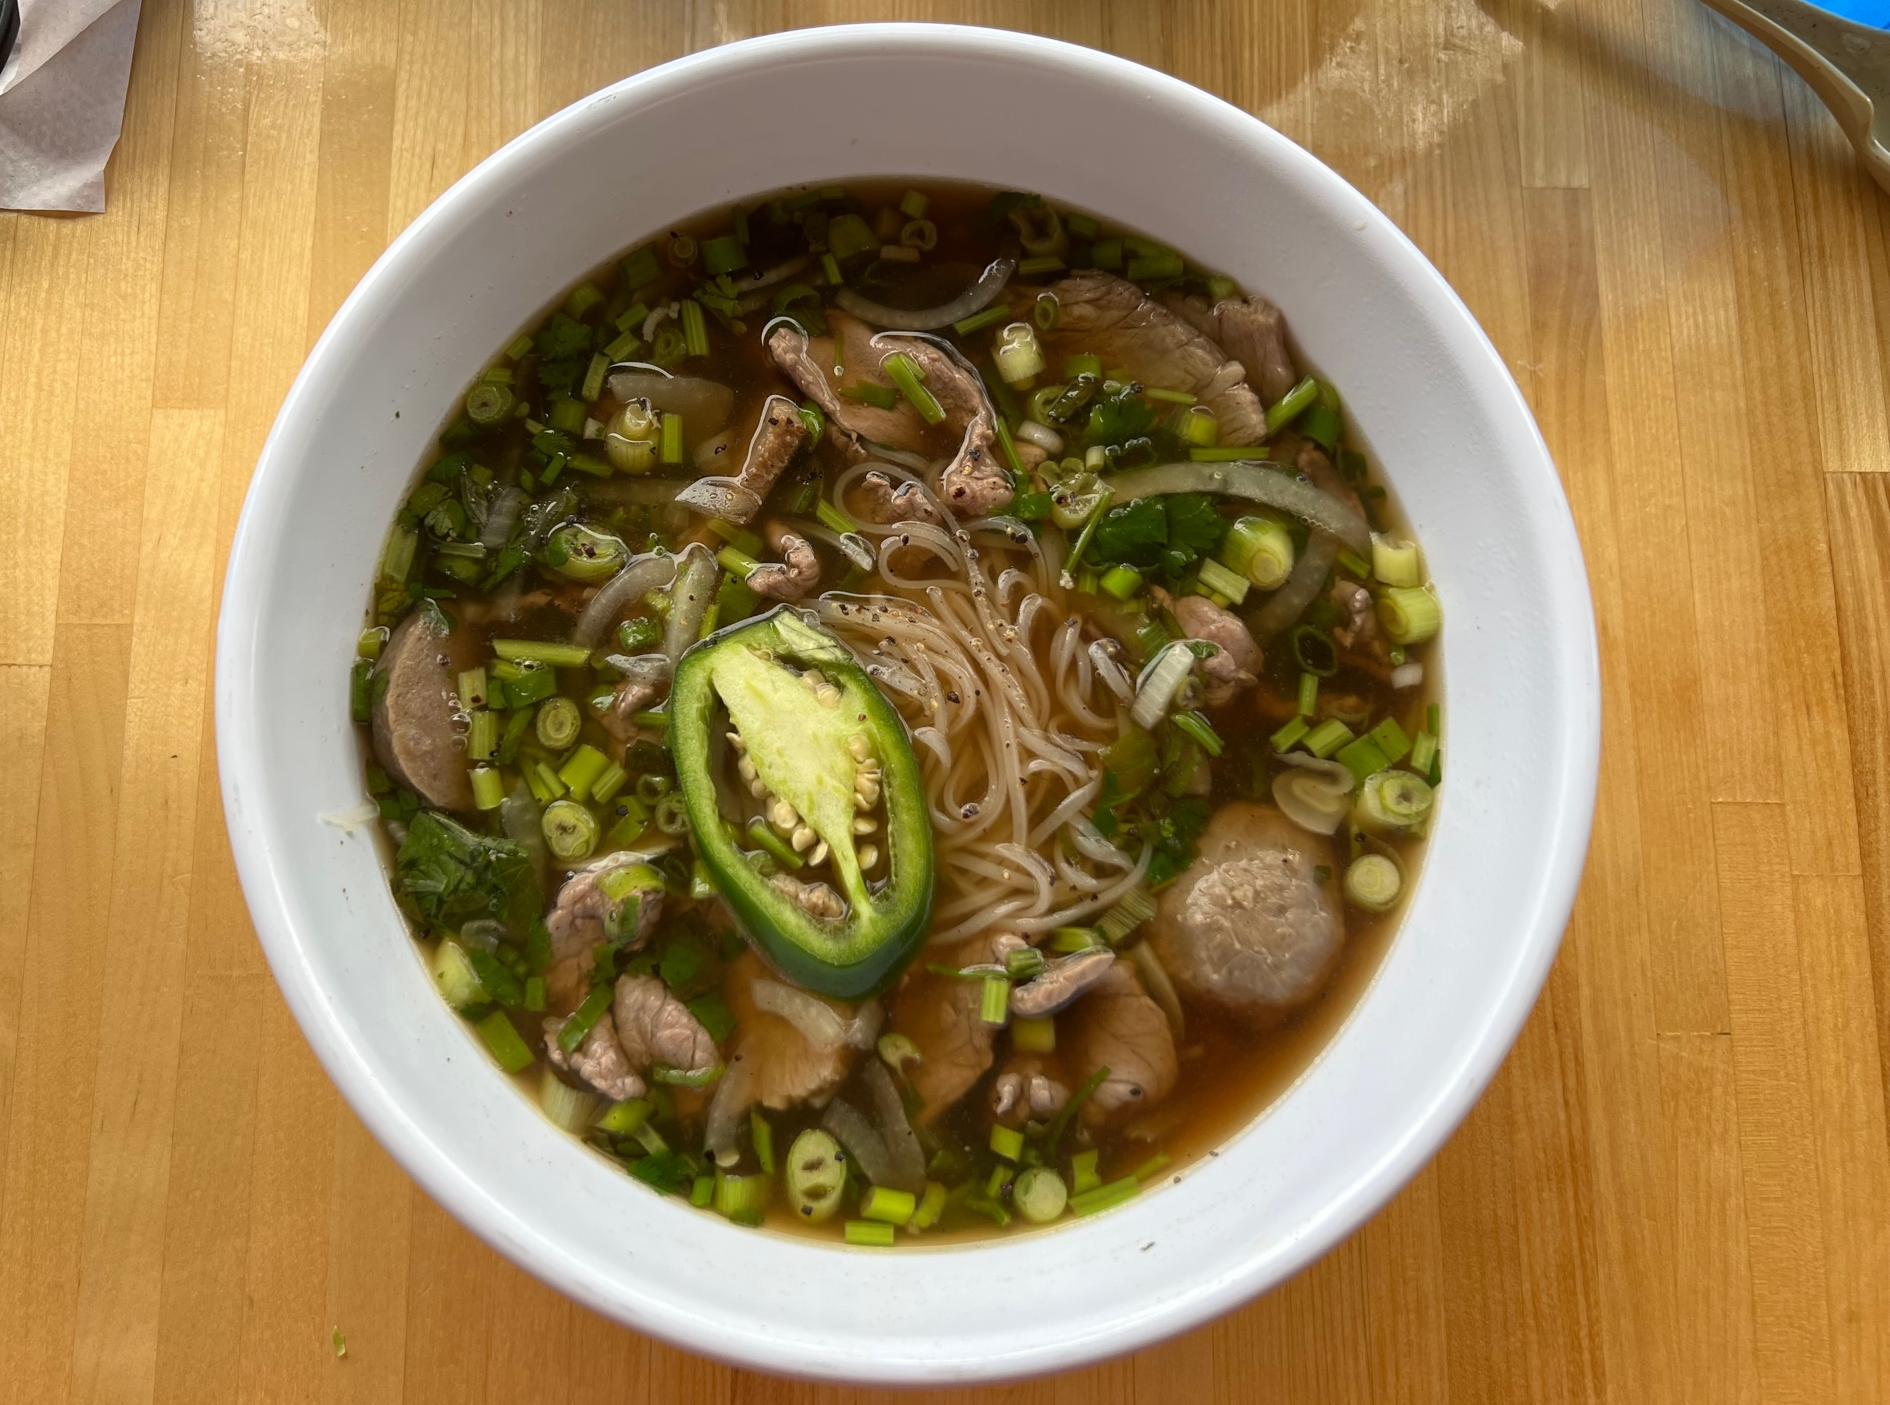 On a wooden table, there is a white bowl of pho with jalapeno, beef, meatballs, green onion, and rice noodles. Photo by Alyssa Buckley.